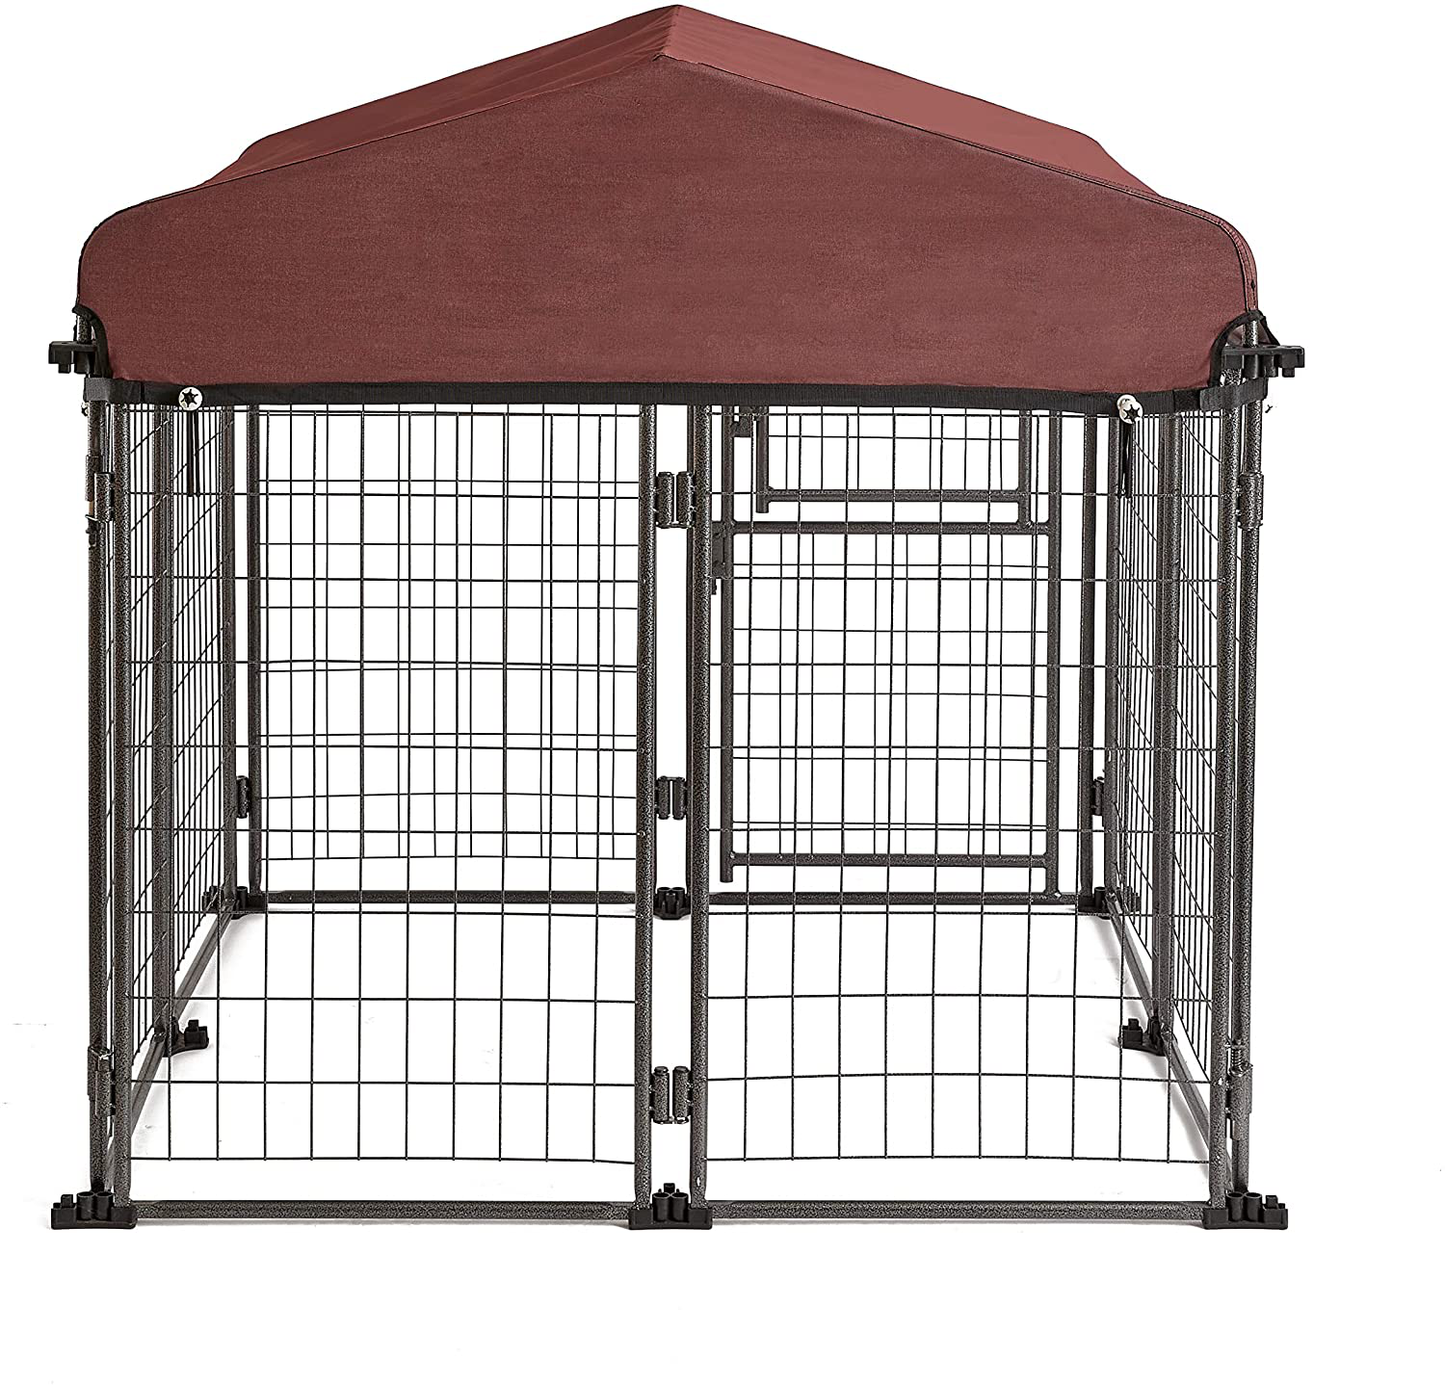 TWO by TWO Haven Expandable Kennel, Black, Medium Animals & Pet Supplies > Pet Supplies > Dog Supplies > Dog Kennels & Runs TWO by TWO   